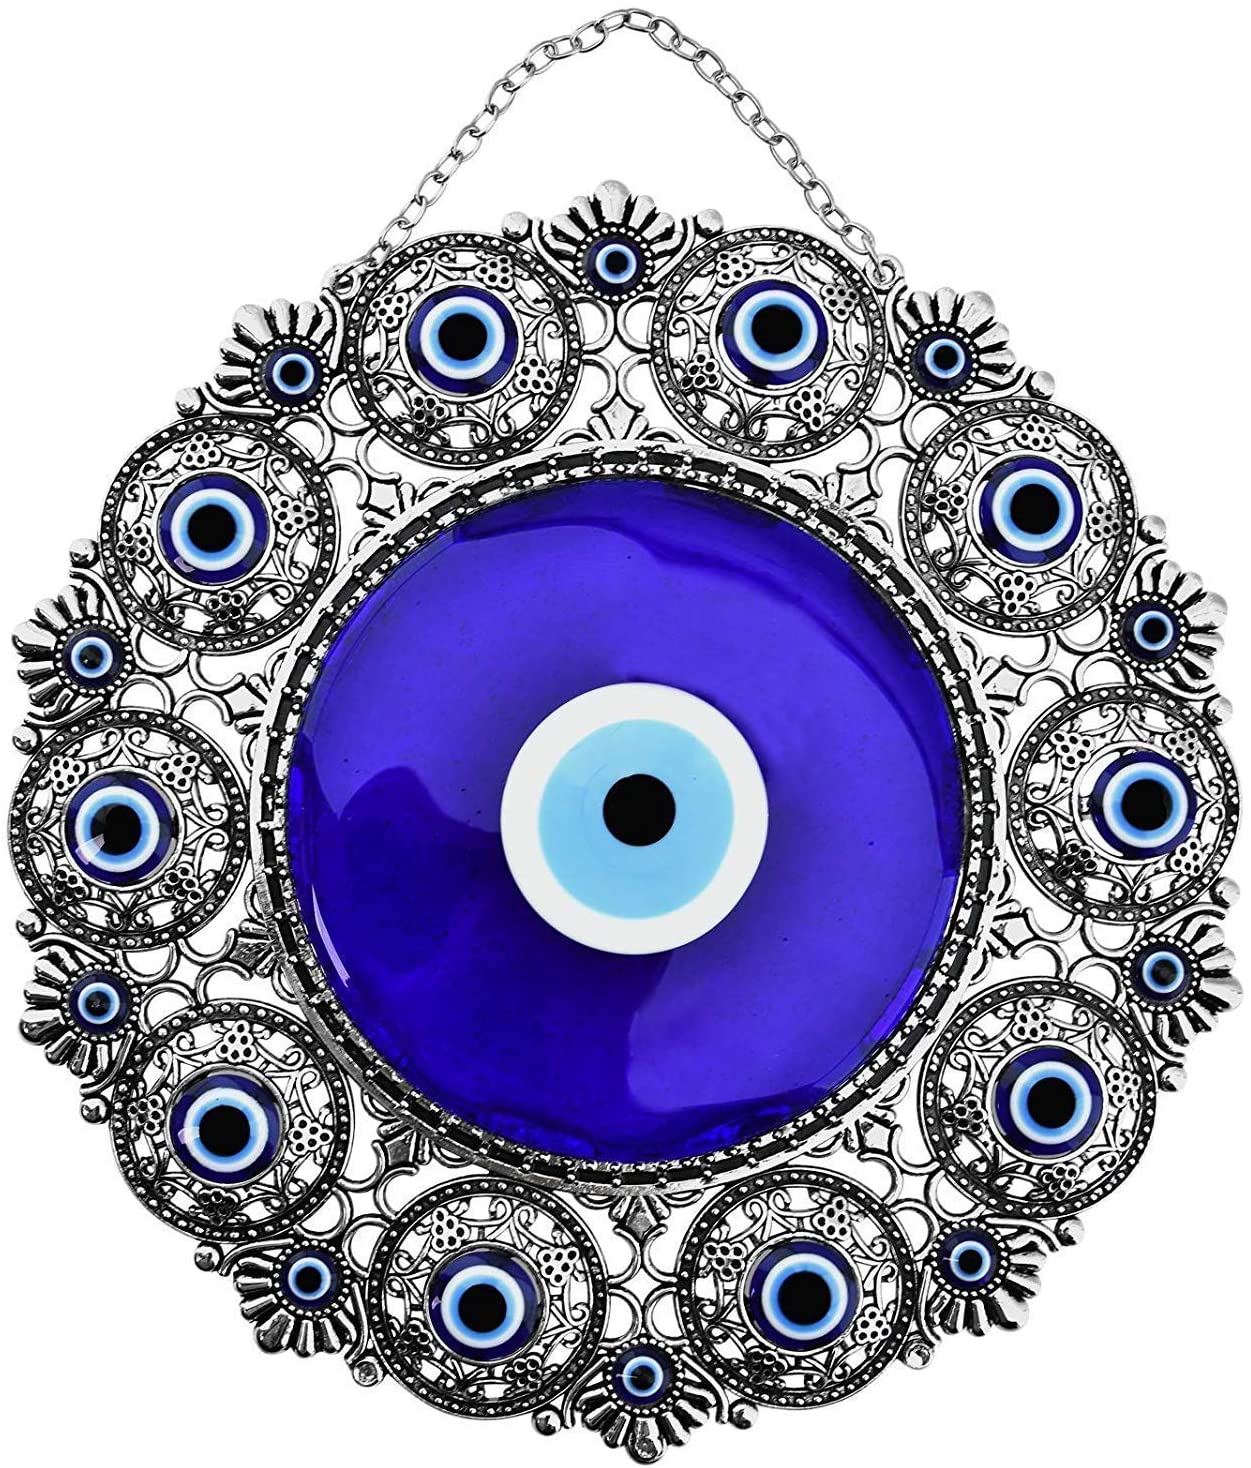 Erbulus Turkish X Large Glass Blue Evil Eye Wall Hanging Ornament With Round Eye Design Home Decor Nazar Bead Amulet And Good Luck Charm Gift (Blue)